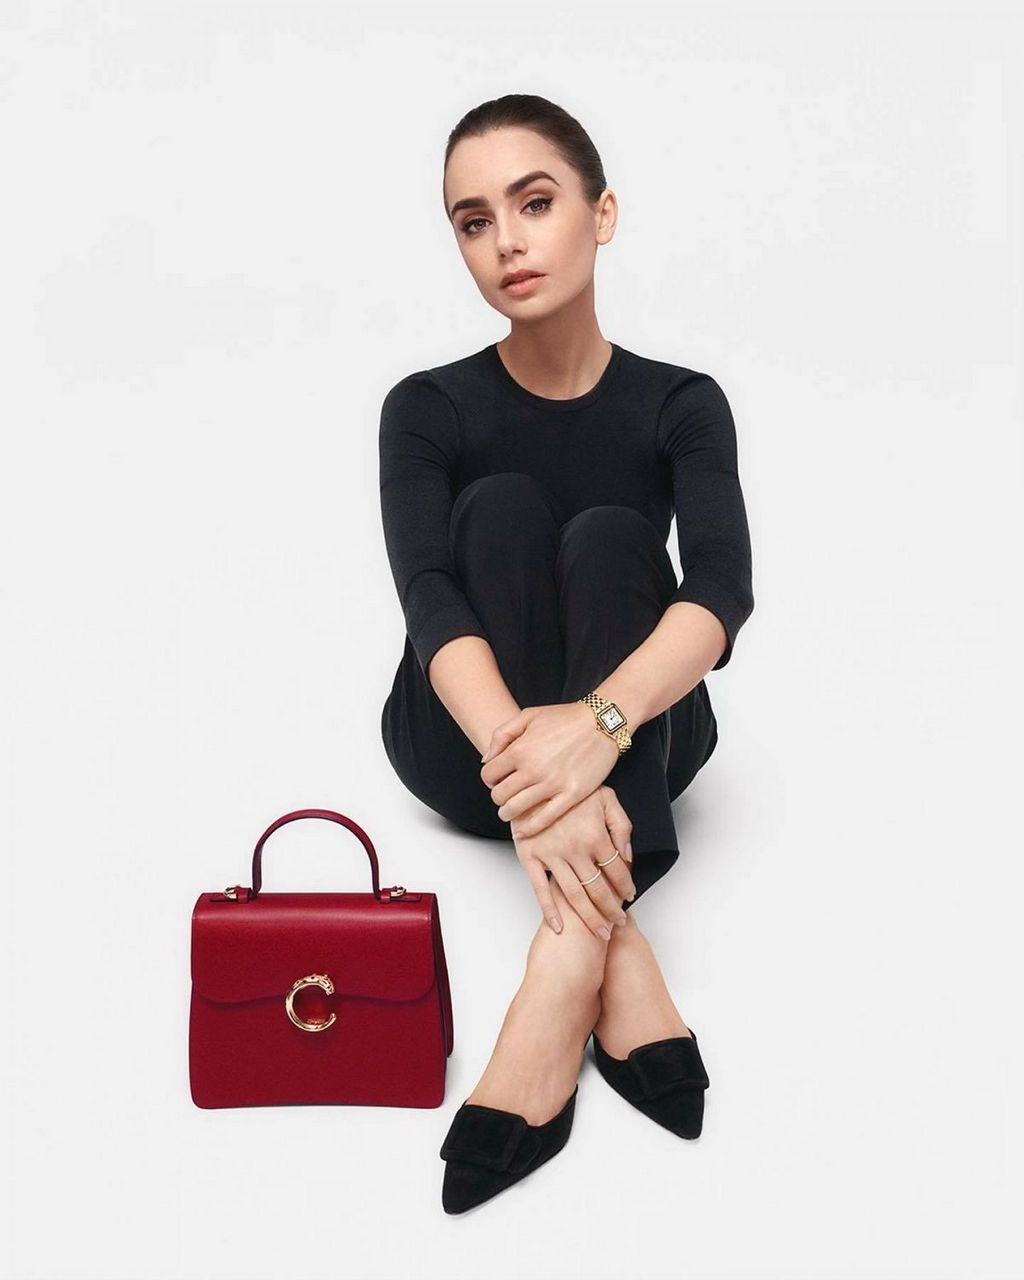 Lily Collins For Panthere De Cartier